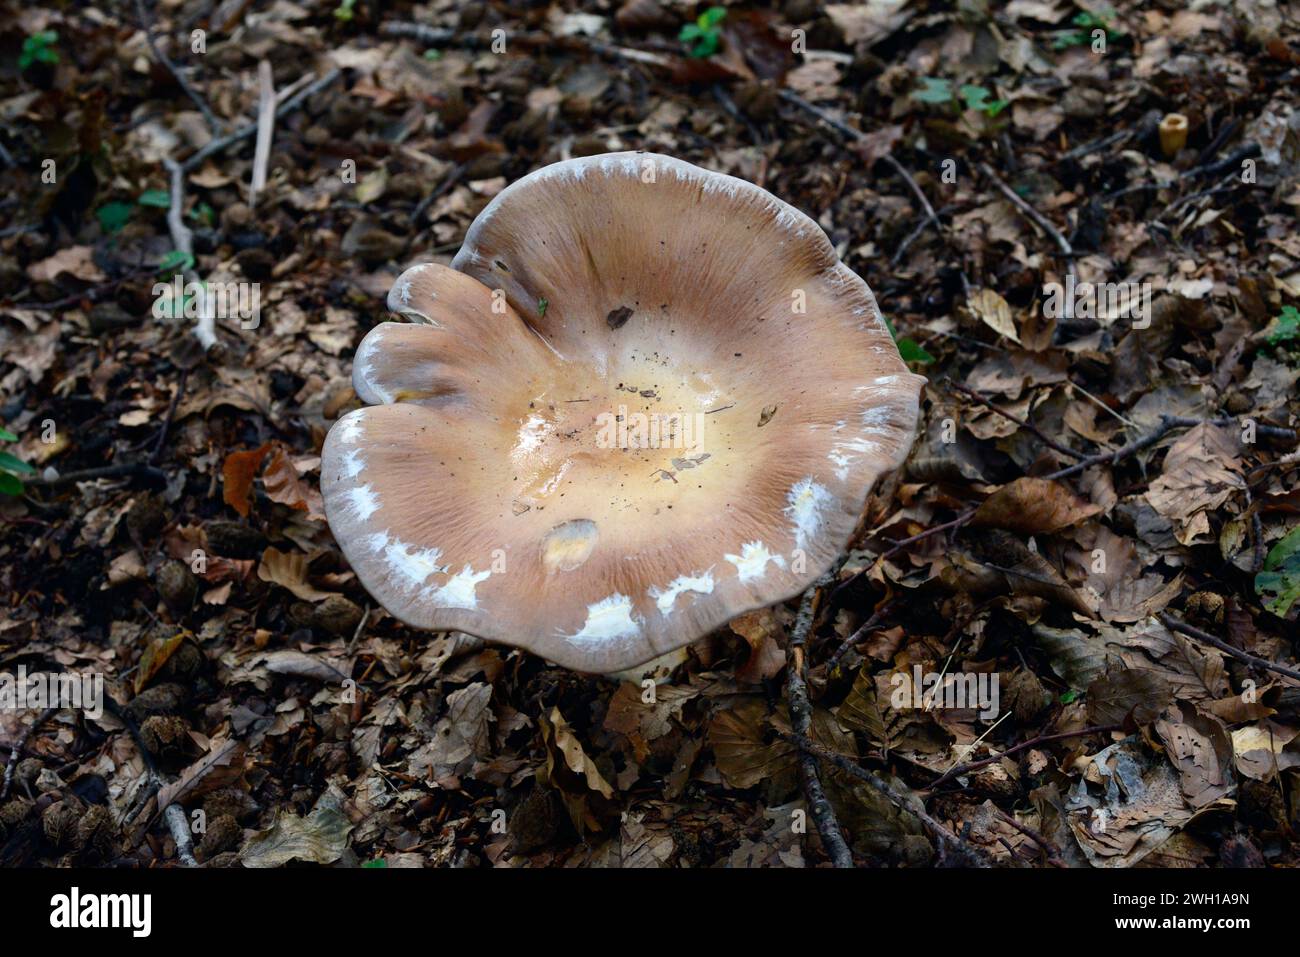 Tawny funnel cap (Lepista inversa, Lepista flaccida or Paralepista flaccida) is an edible mushroom. This photo was taken in Montseny Biosphere Reserve Stock Photo